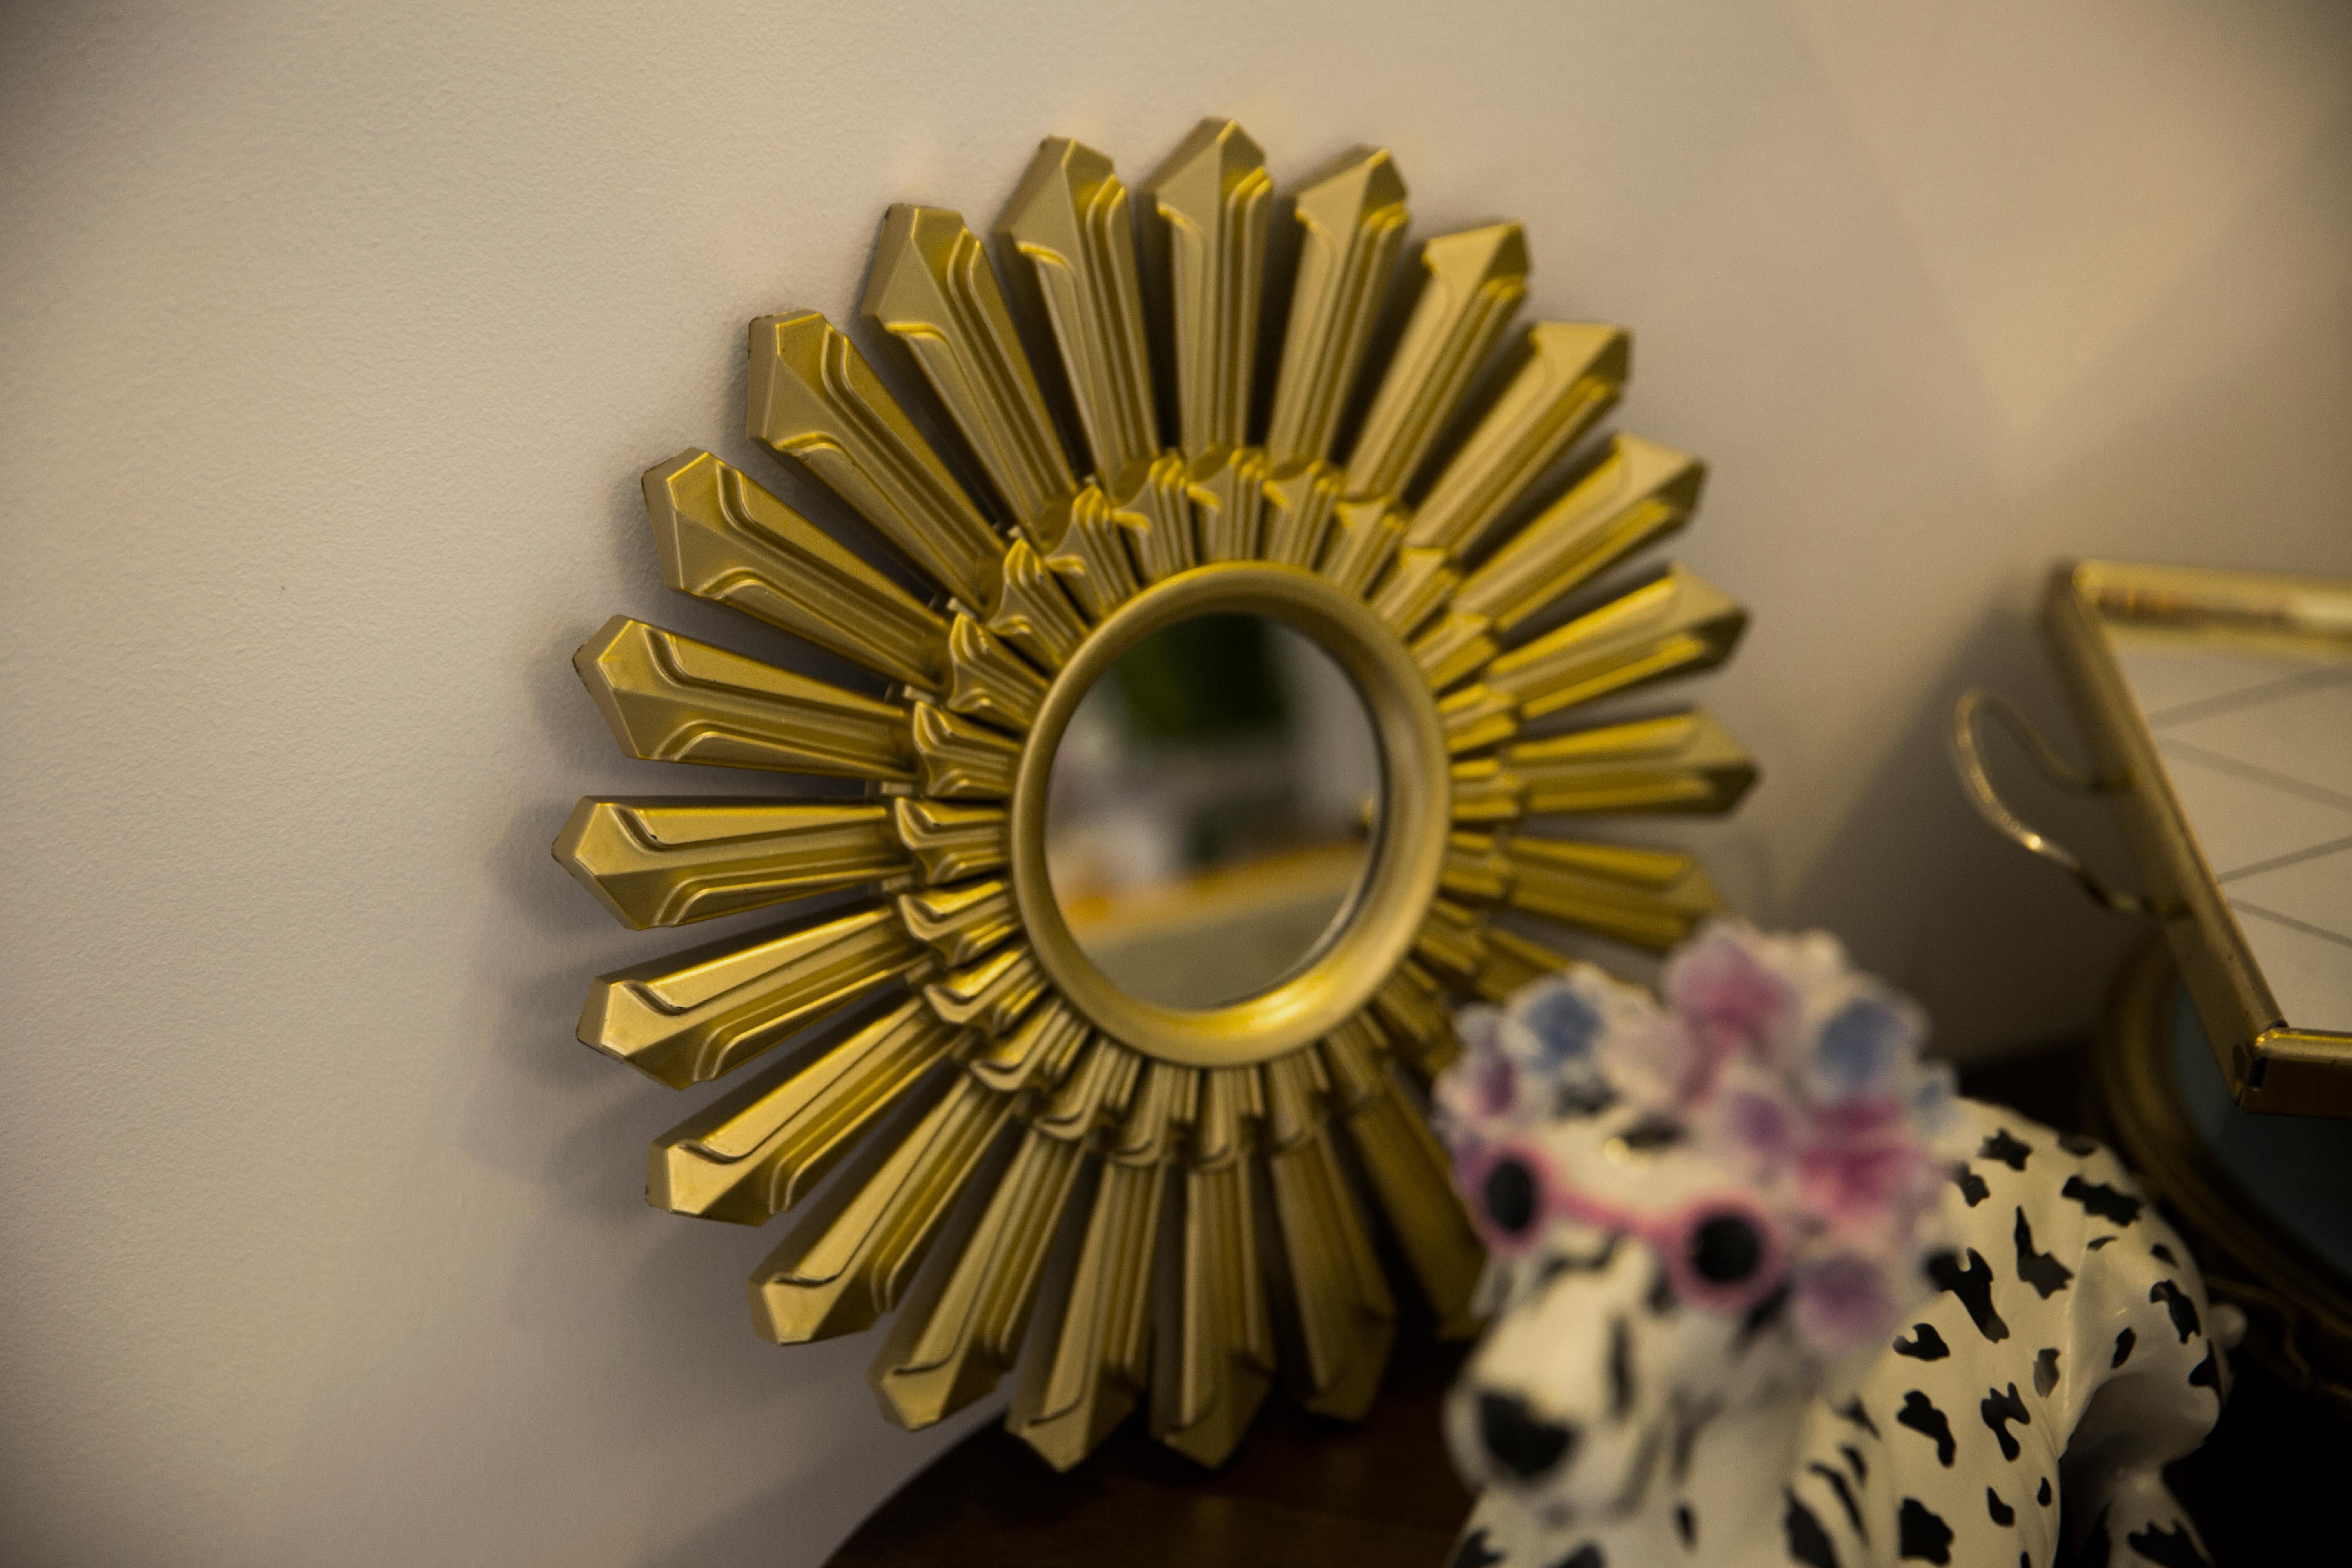 Vintage mirror in a golden decorative sun-shaped frame from Italy. The frame is made of plastic. Good original condition, no damage or cracks in the frame, the mirror pane has minimal flaws. Beautiful piece for every interior! Absolutely unique.